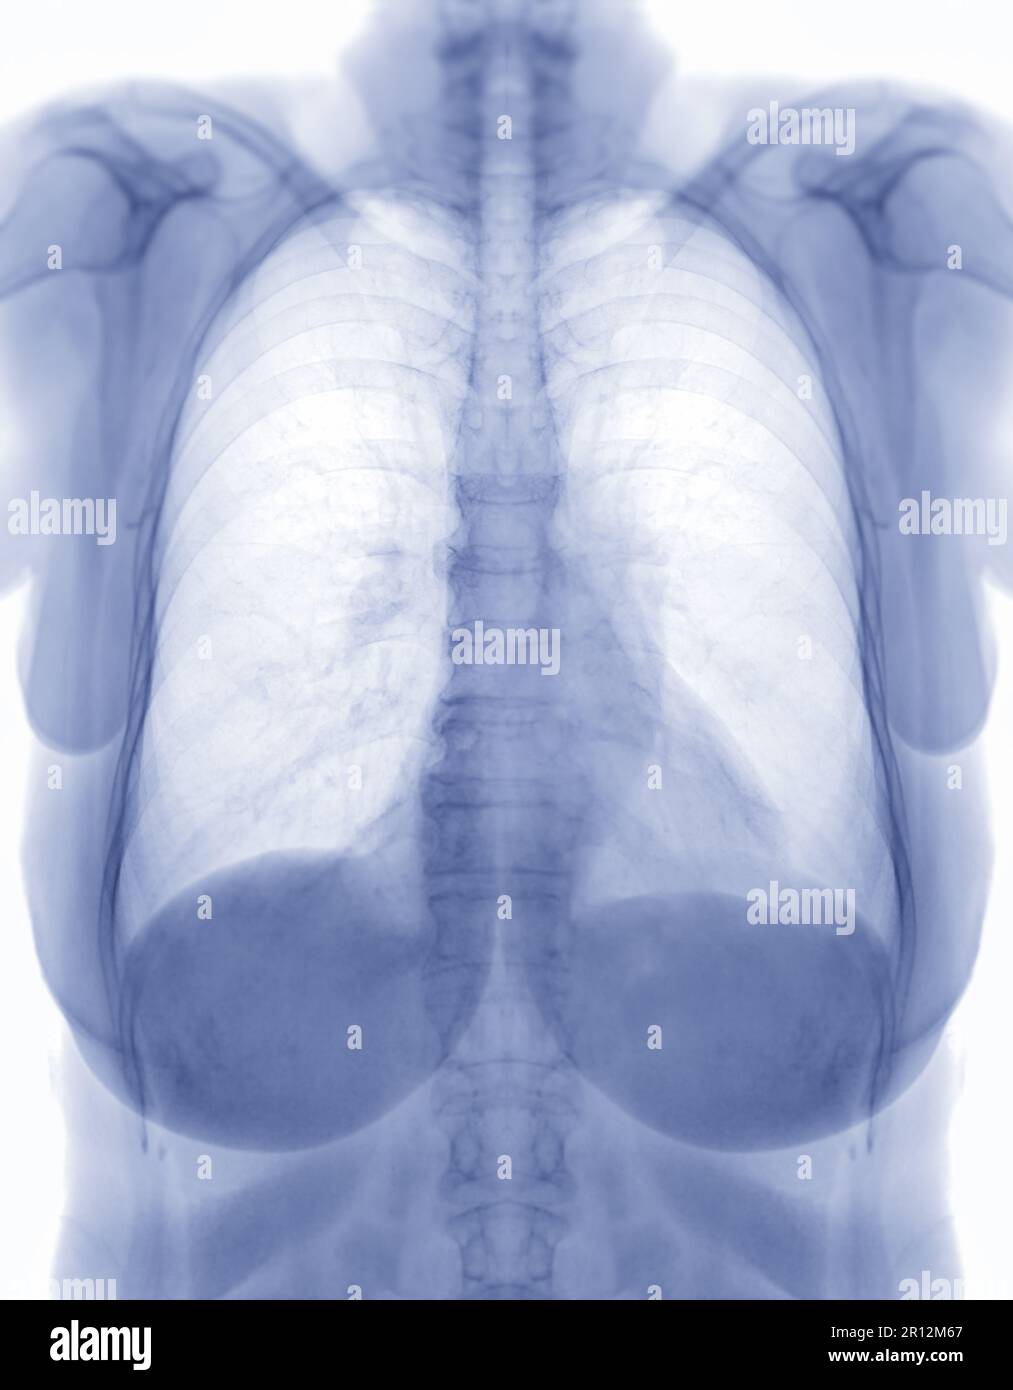 Chest x-ray image Negative filter Stock Photo - Alamy